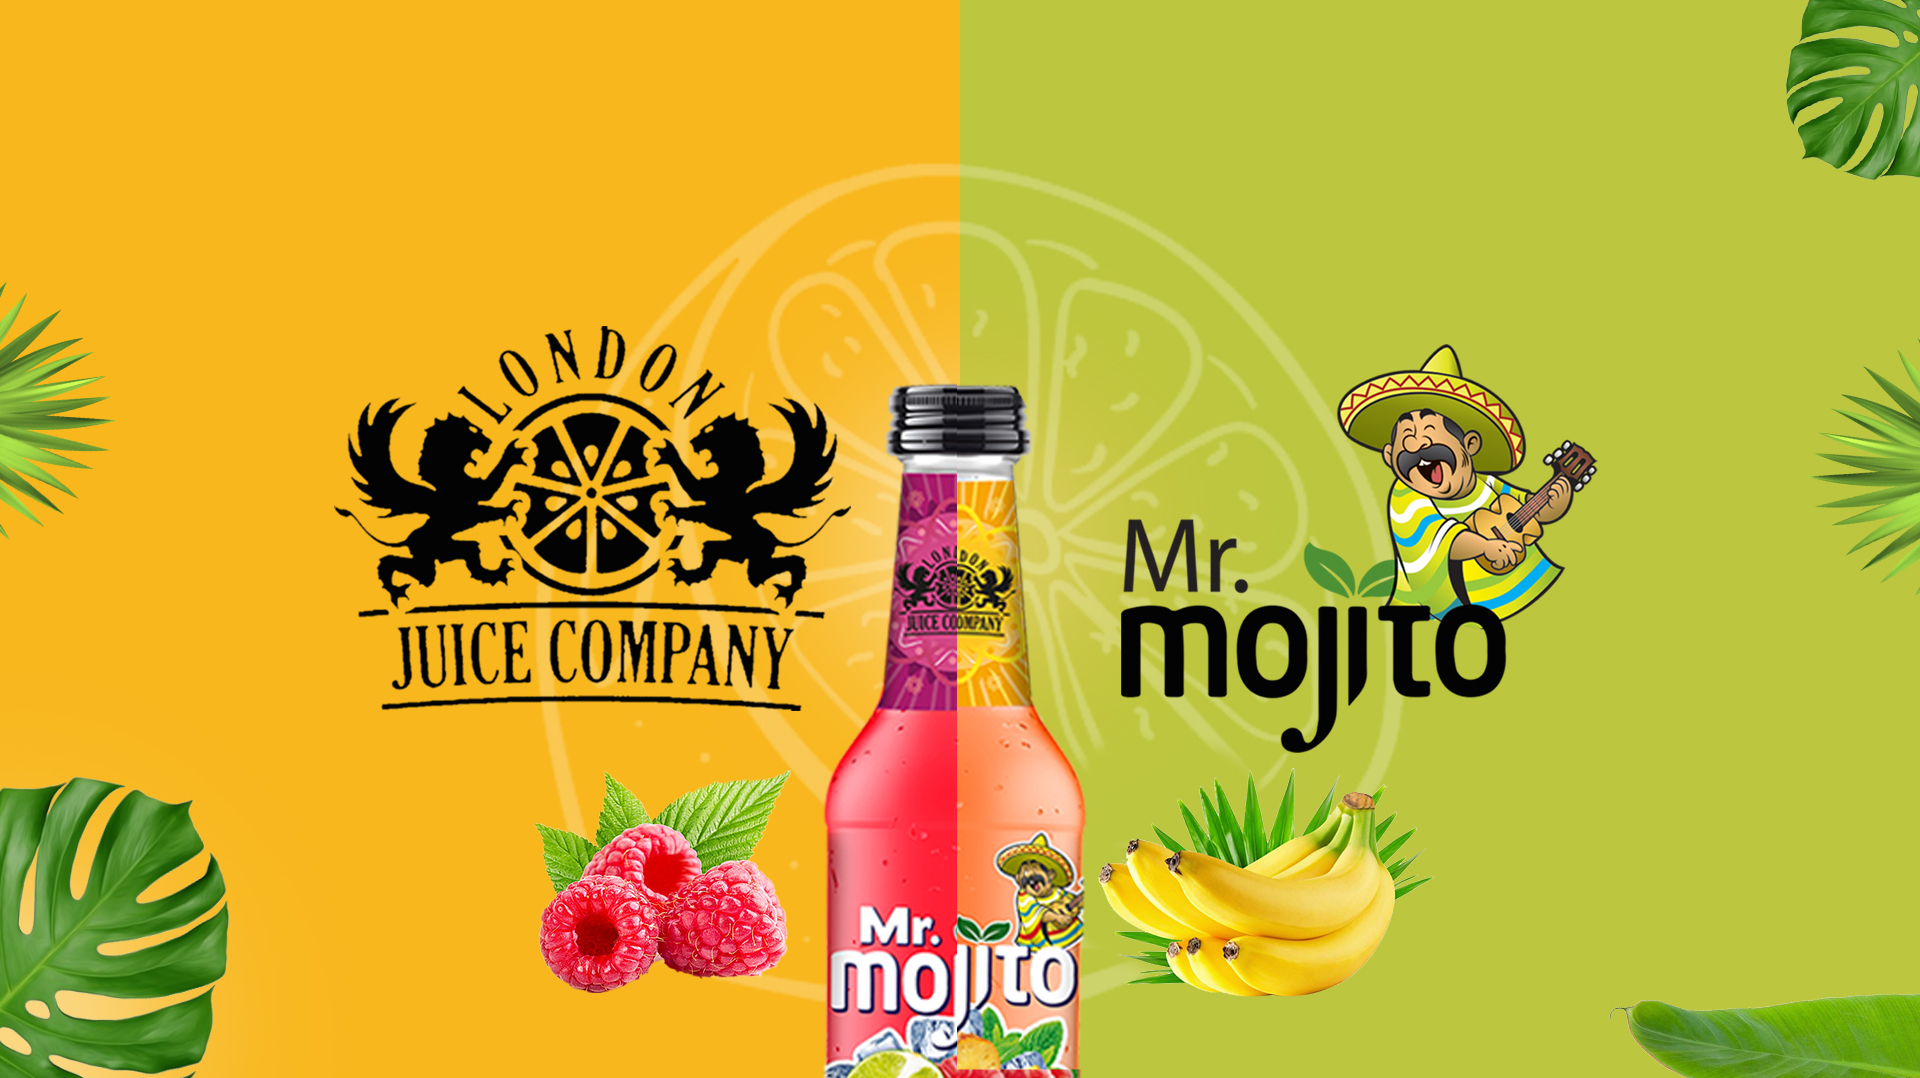 Three brightly colored cans of Mr. mojo flavored mojito beverages, raspberry, mango and watermelon, are displayed with fruit slices on a green background.